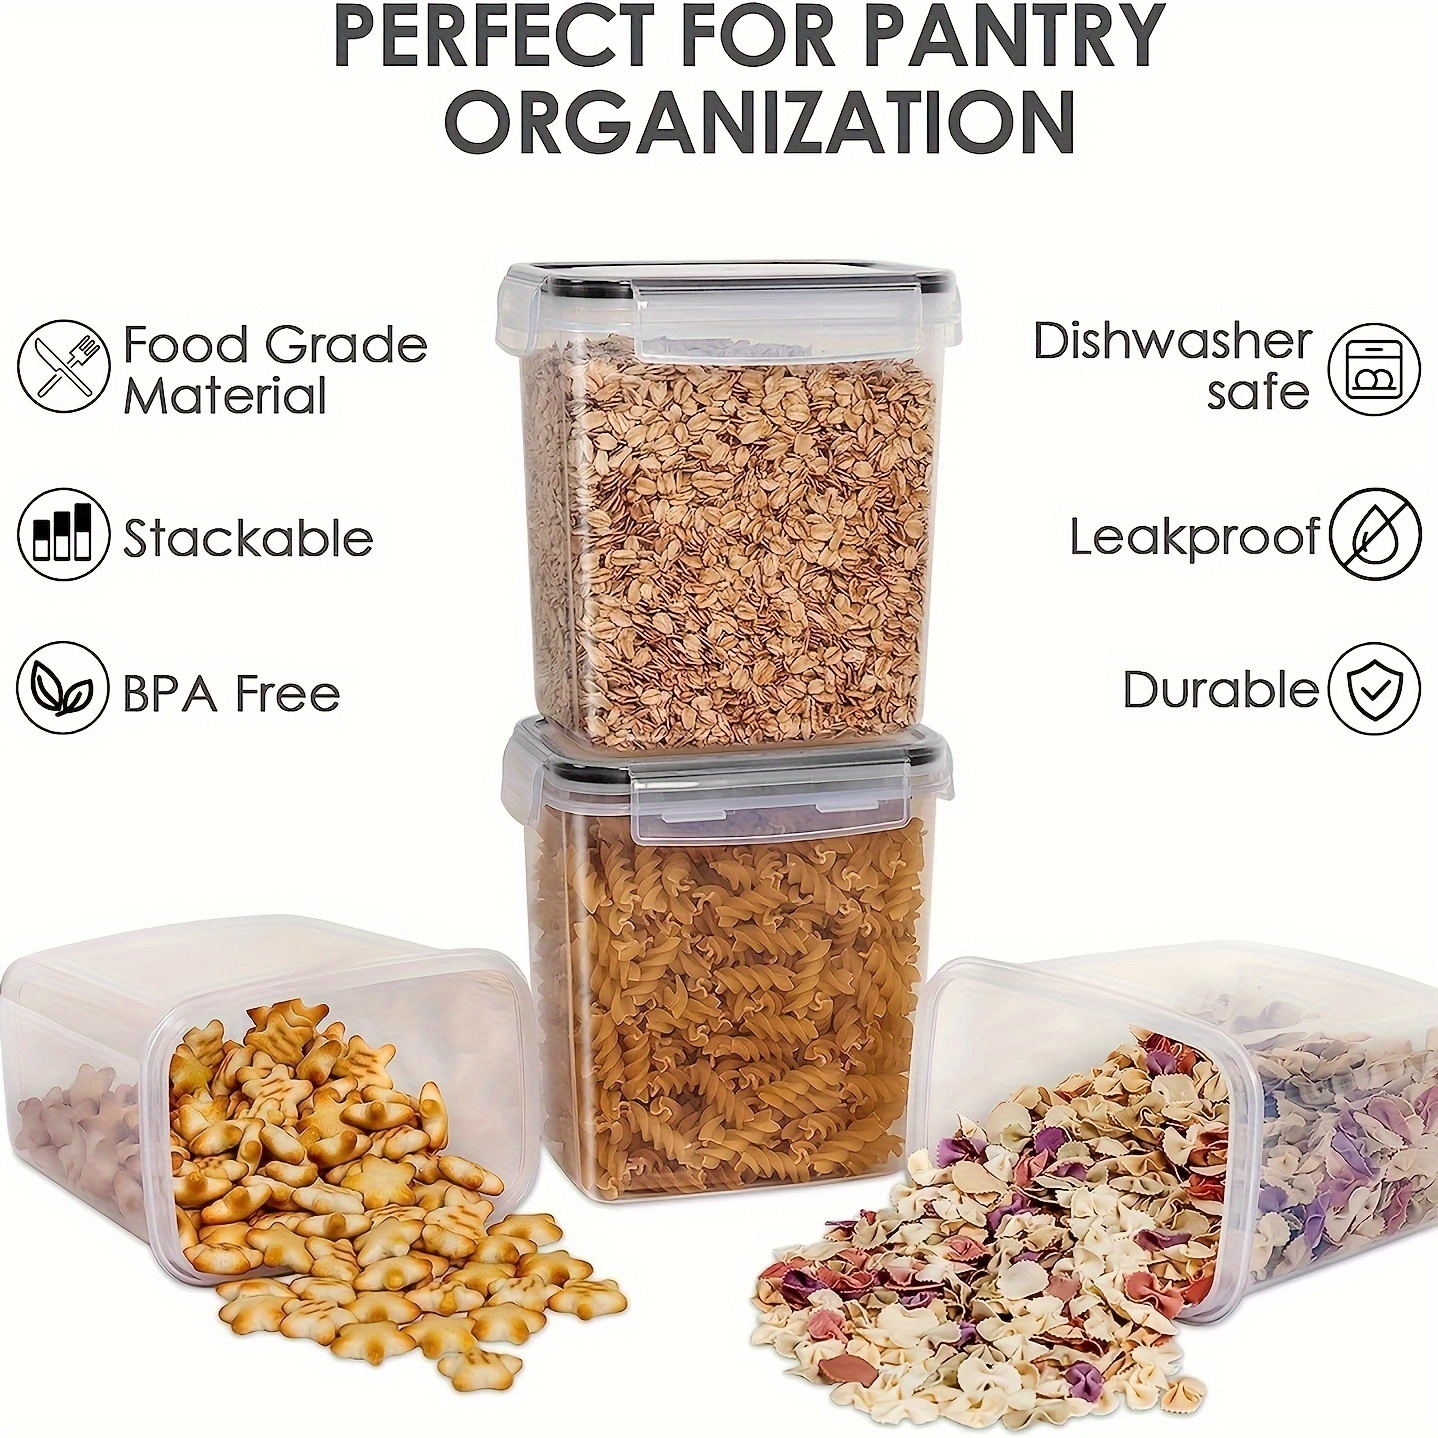 2pcs Extra Tall Food Storage Containers With Lids 2.8L/98oz, BPA Free PP  Material Plastic Airtight Food Storage For Flour, Pasta, Baking Supplies